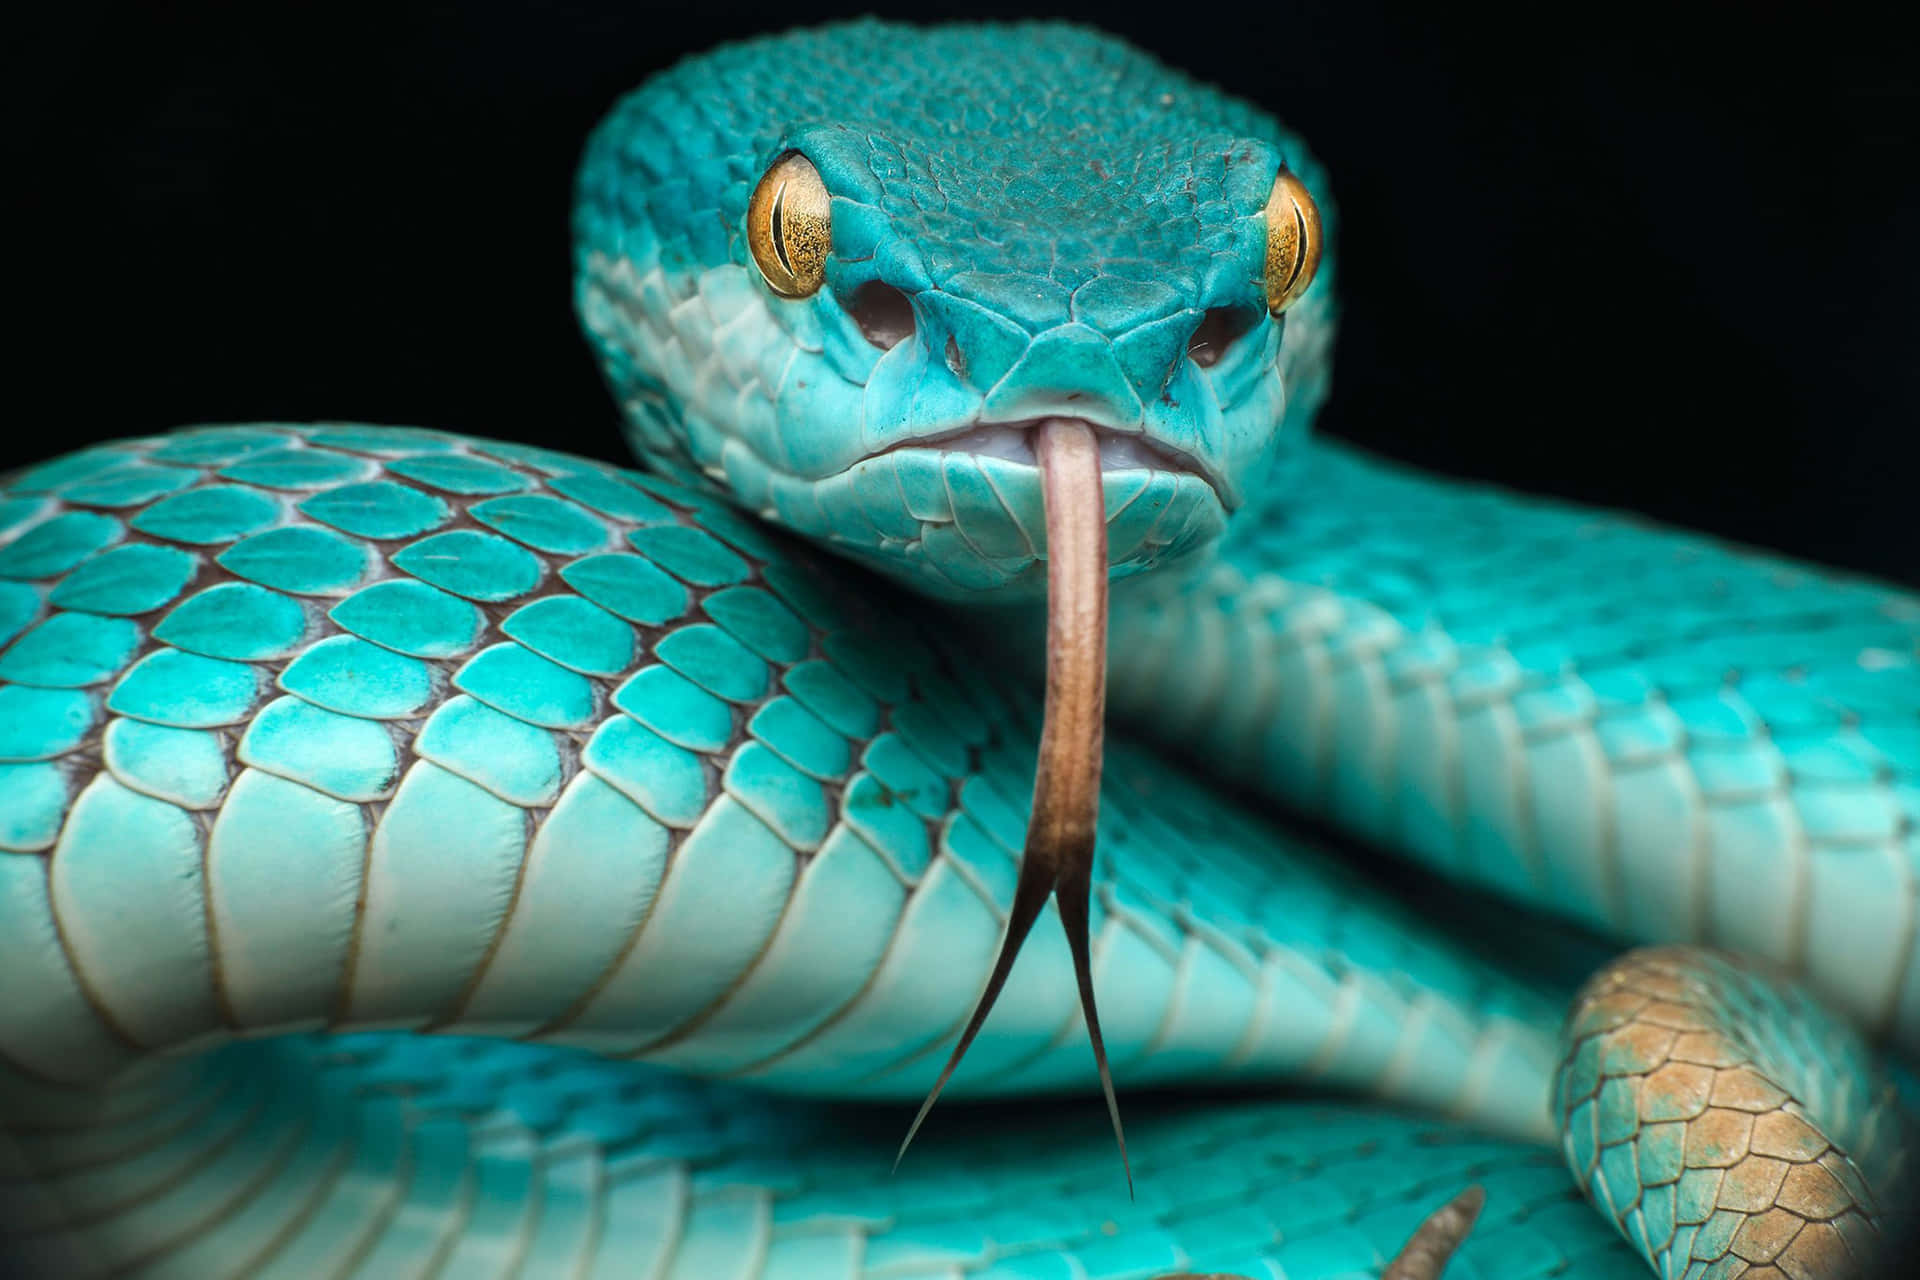 Ferocious Cool Snake With Golden Eyes